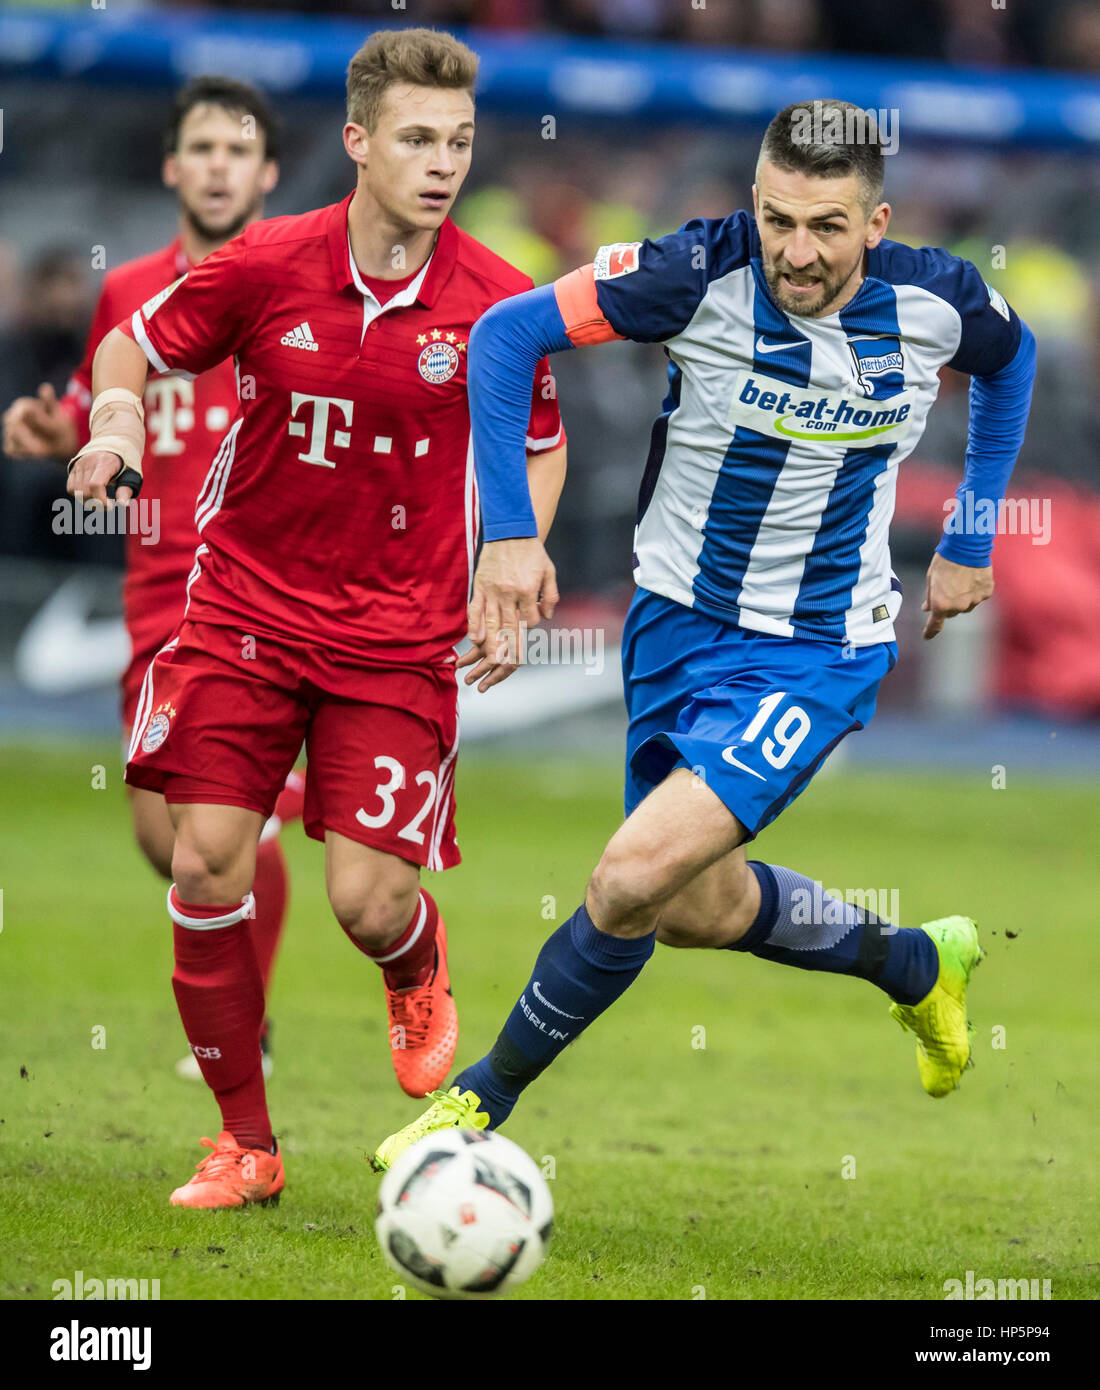 Berlin, Germany. 18 th February, 2017.  Joshua KIMMICH, FCB 32  compete for the ball against  Vedad IBISEVIC, Hertha 19  in the 1. German Soccer League match HERTHA BSC BERLIN - FC BAYERN MUNICH  in Berlin,, February 18, 2017   © Peter Schatz / Alamy Live News Stock Photo